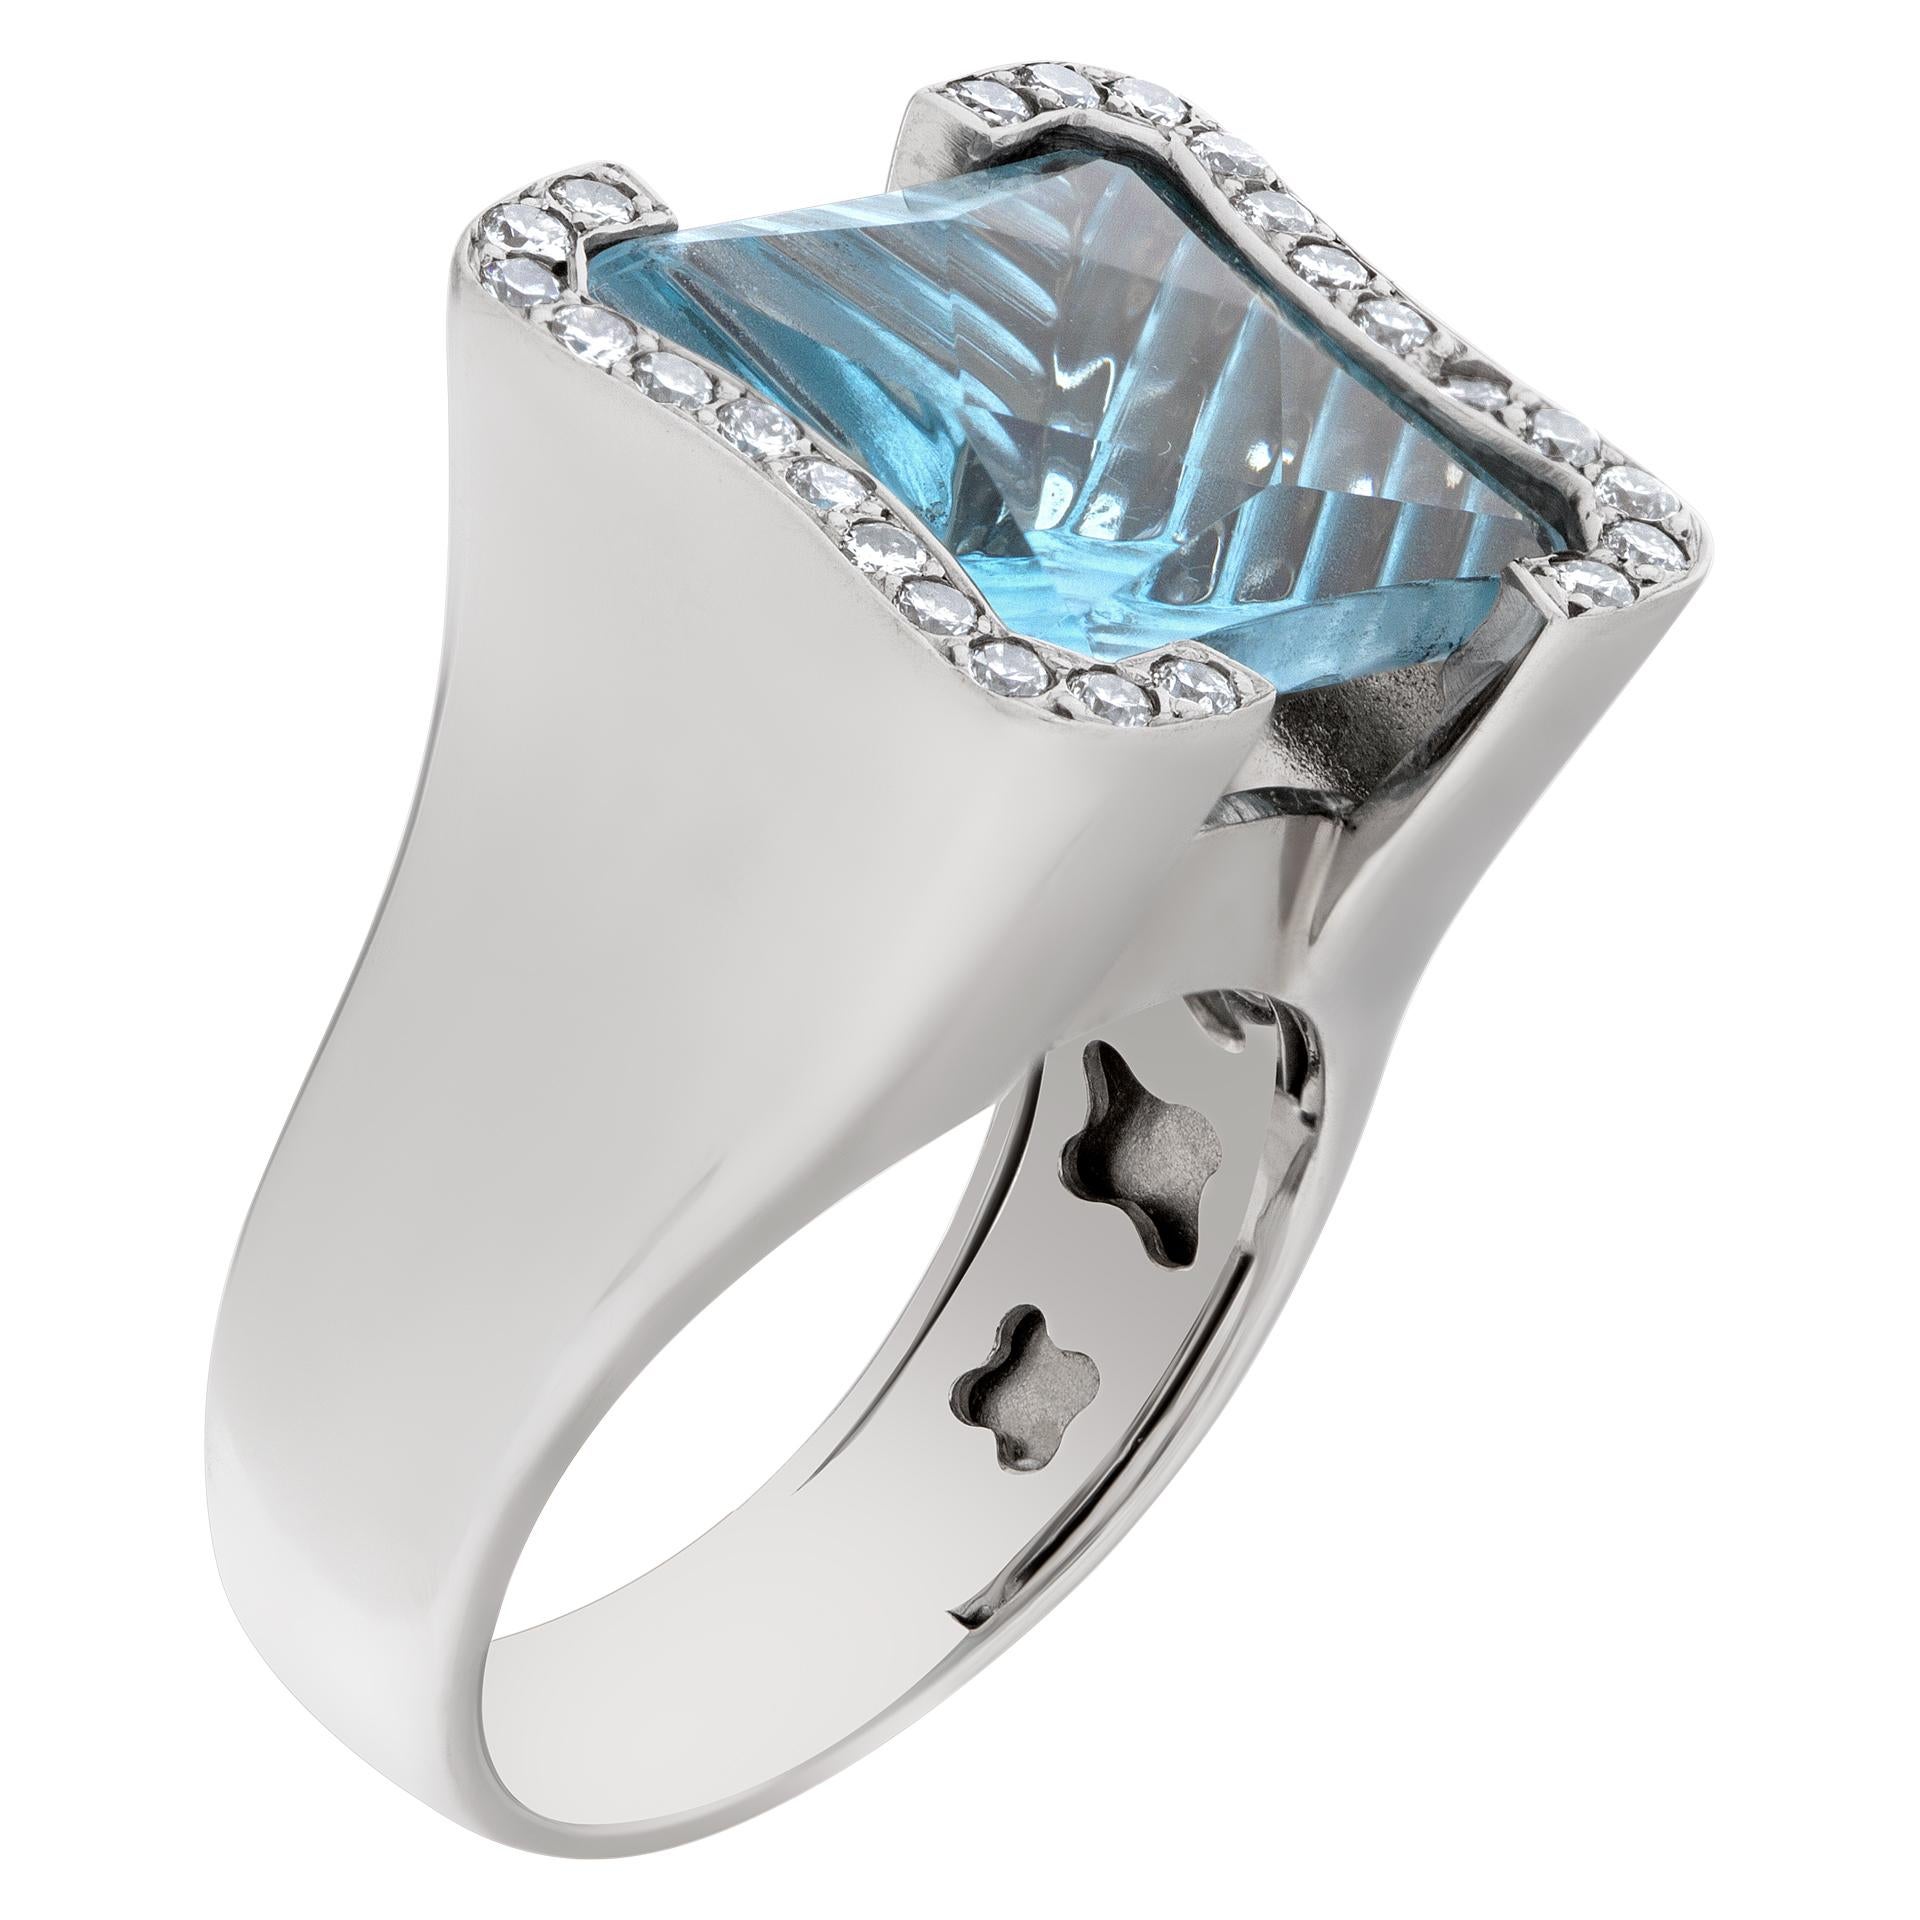 Blue Topaz and Diamond Ring in 18k White Gold In Excellent Condition For Sale In Surfside, FL